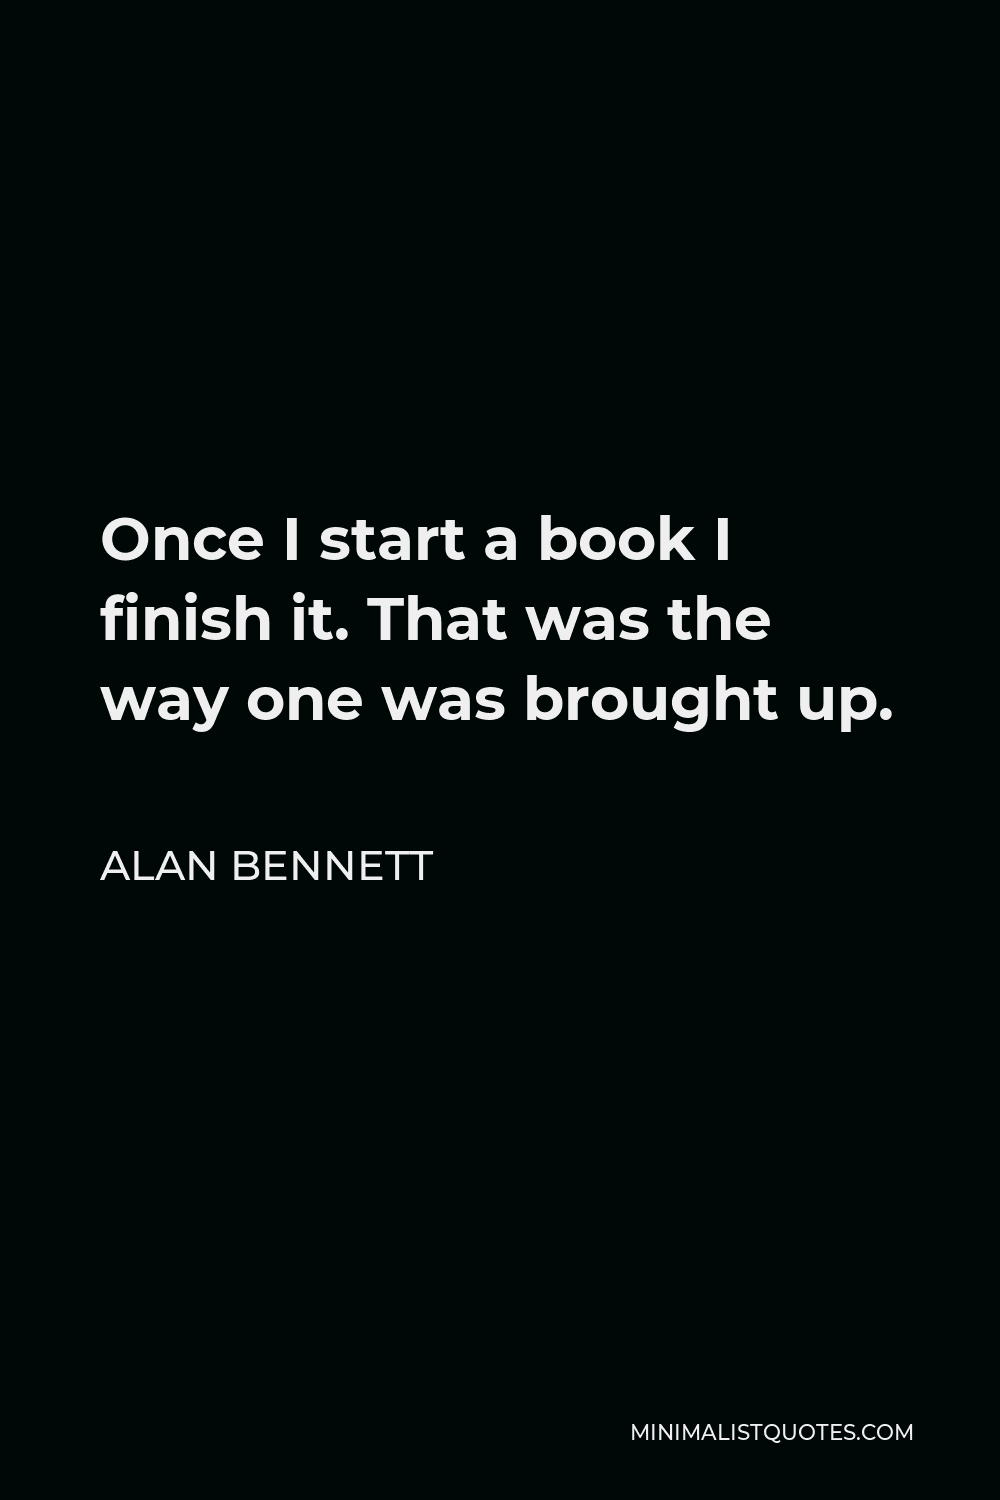 Alan Bennett Quote - Once I start a book I finish it. That was the way one was brought up.